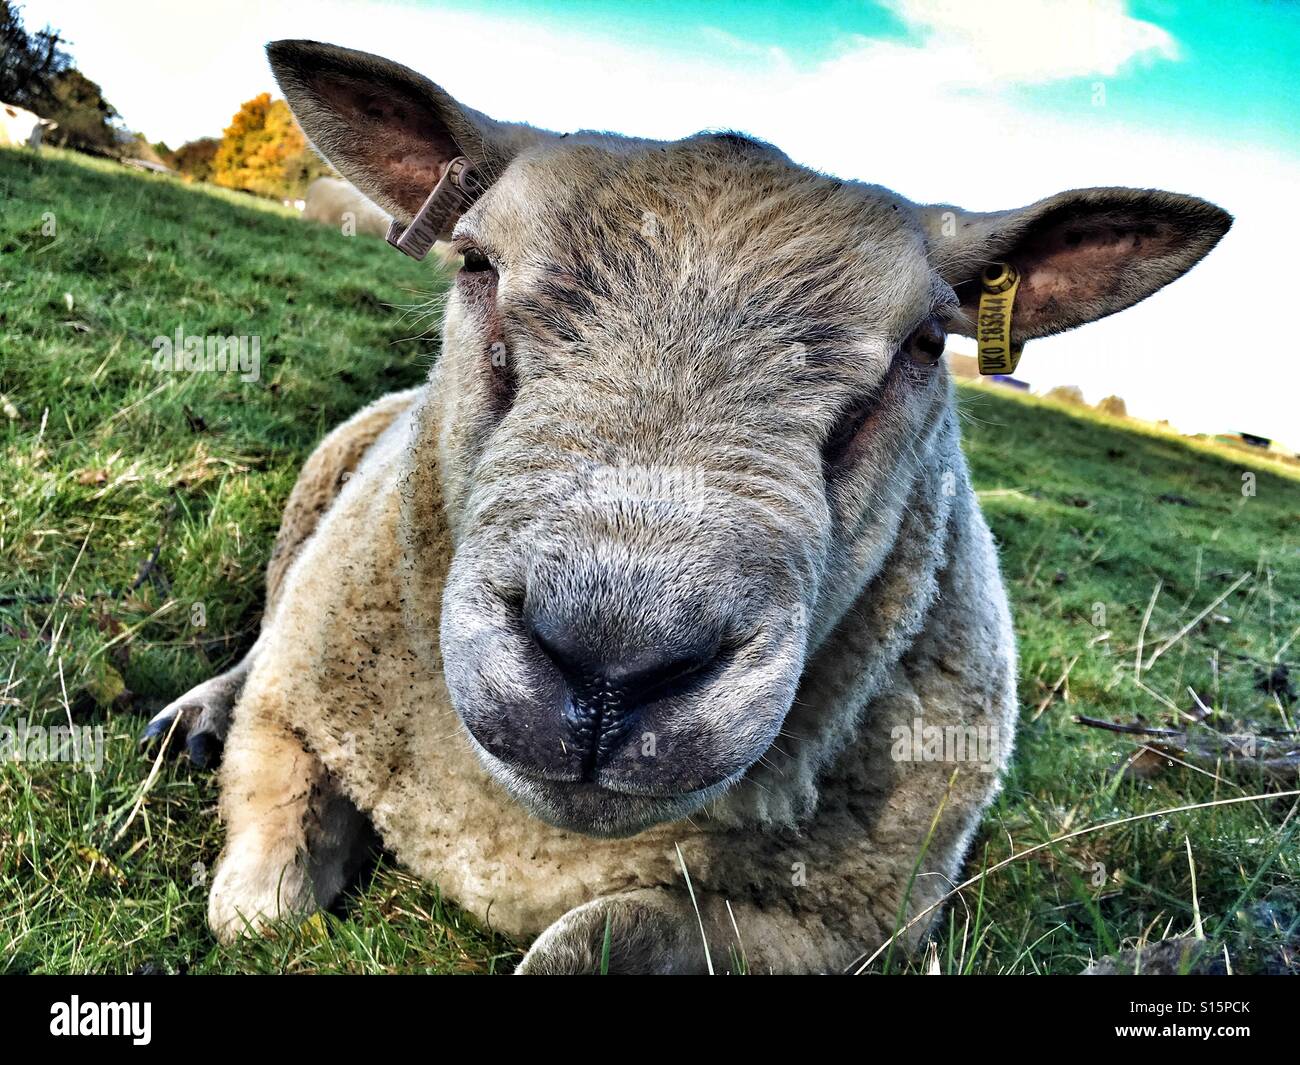 Sheep laid down in a field Stock Photo